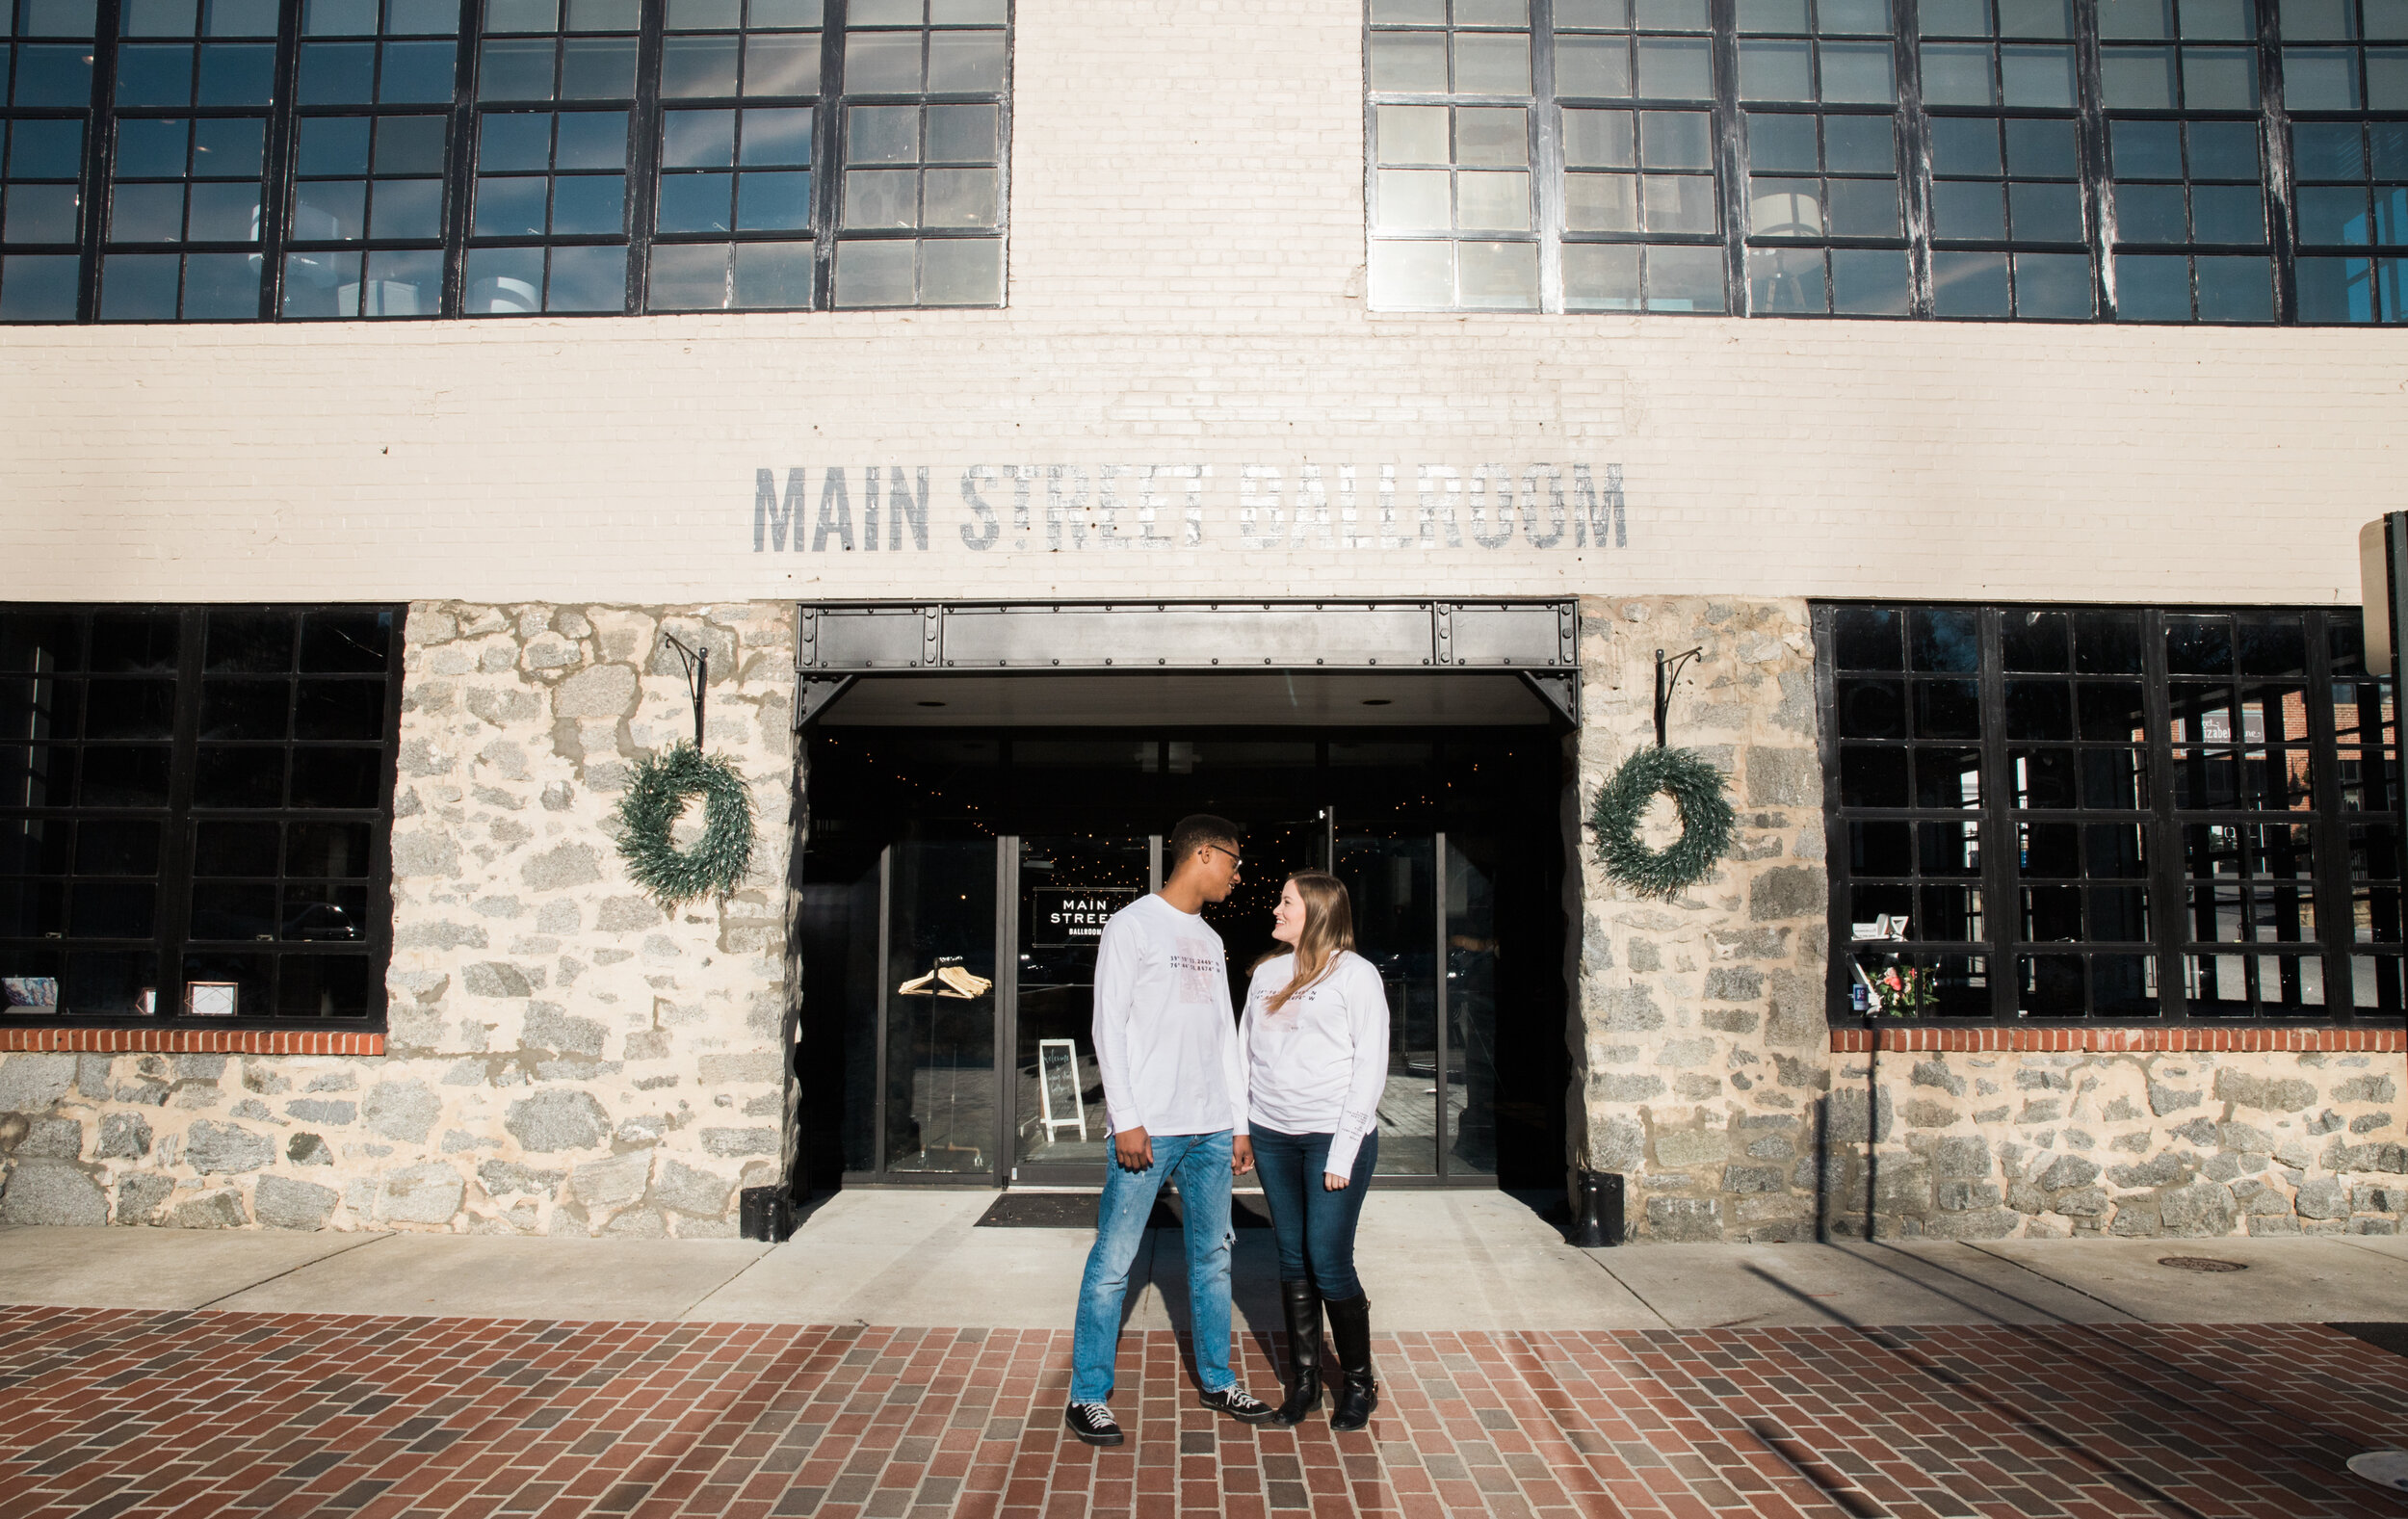 Custom Hand Lettered Signs for Engagement Photos by Signs of Our Lives shot by Megapixels Media Photography Best Baltimore Wedding Photographers Main Street Ballroom-8.jpg